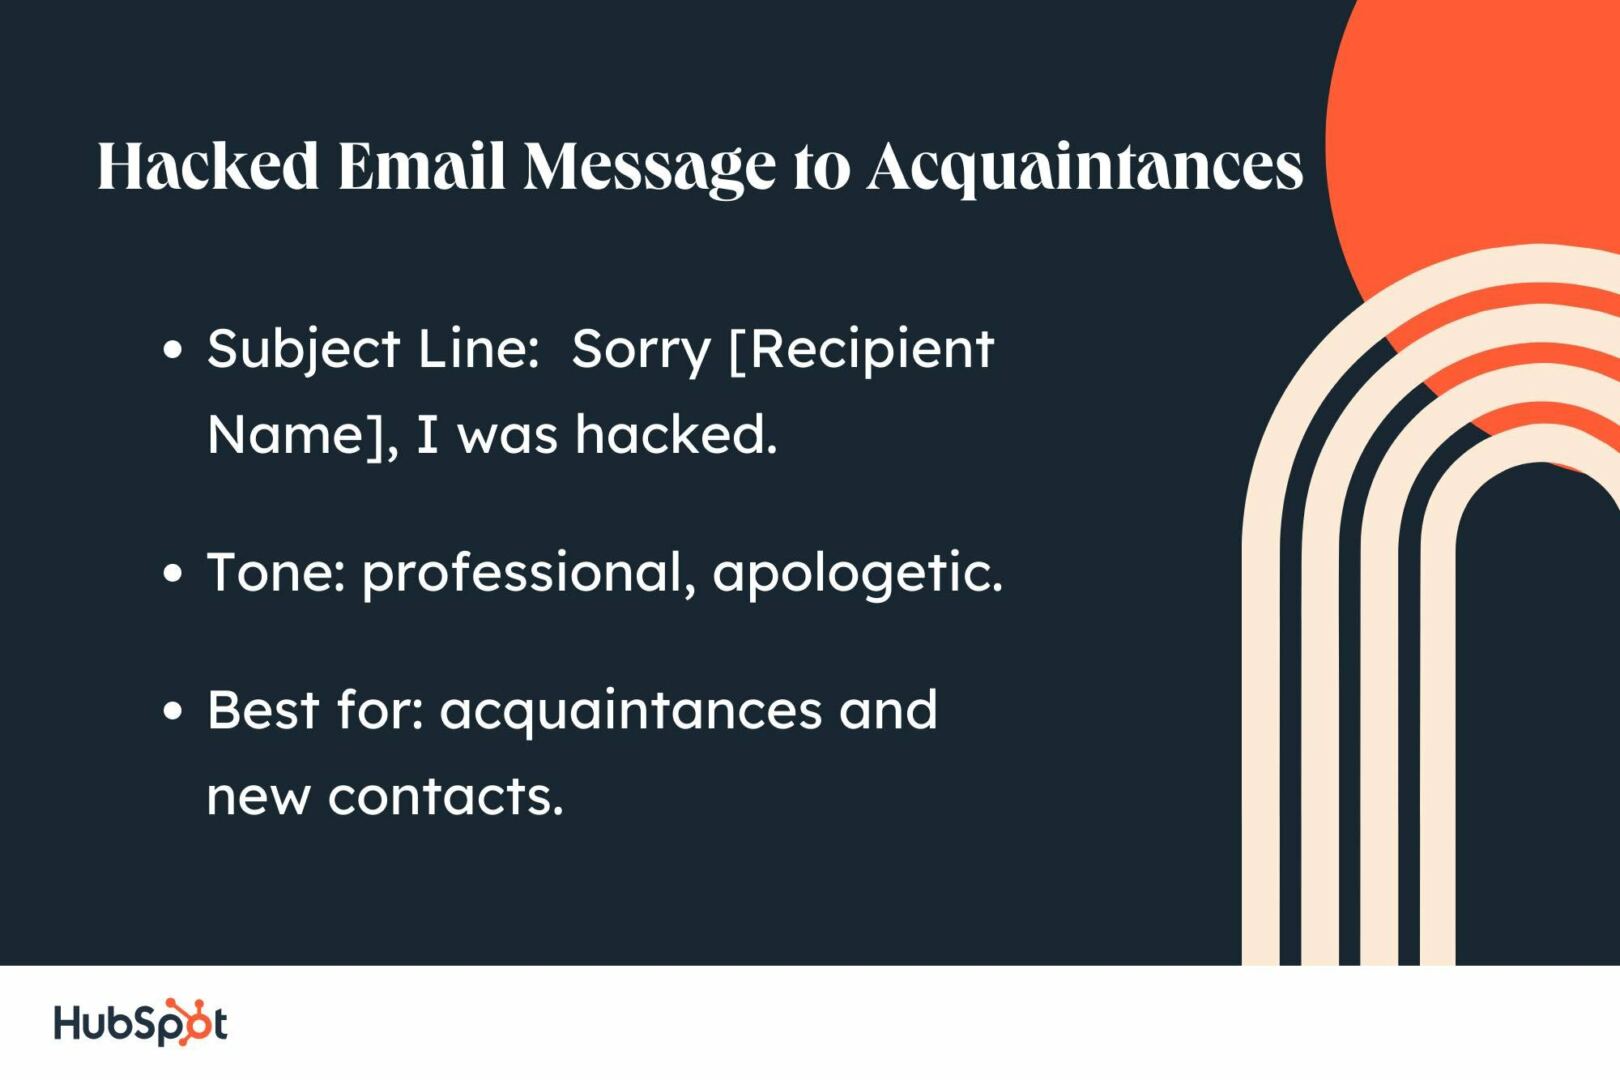  sample letter for hacked email: subject line, Sorry [Recipient Name], I was hacked; tone, professional, apologetic; best for acquaintances and new contacts.